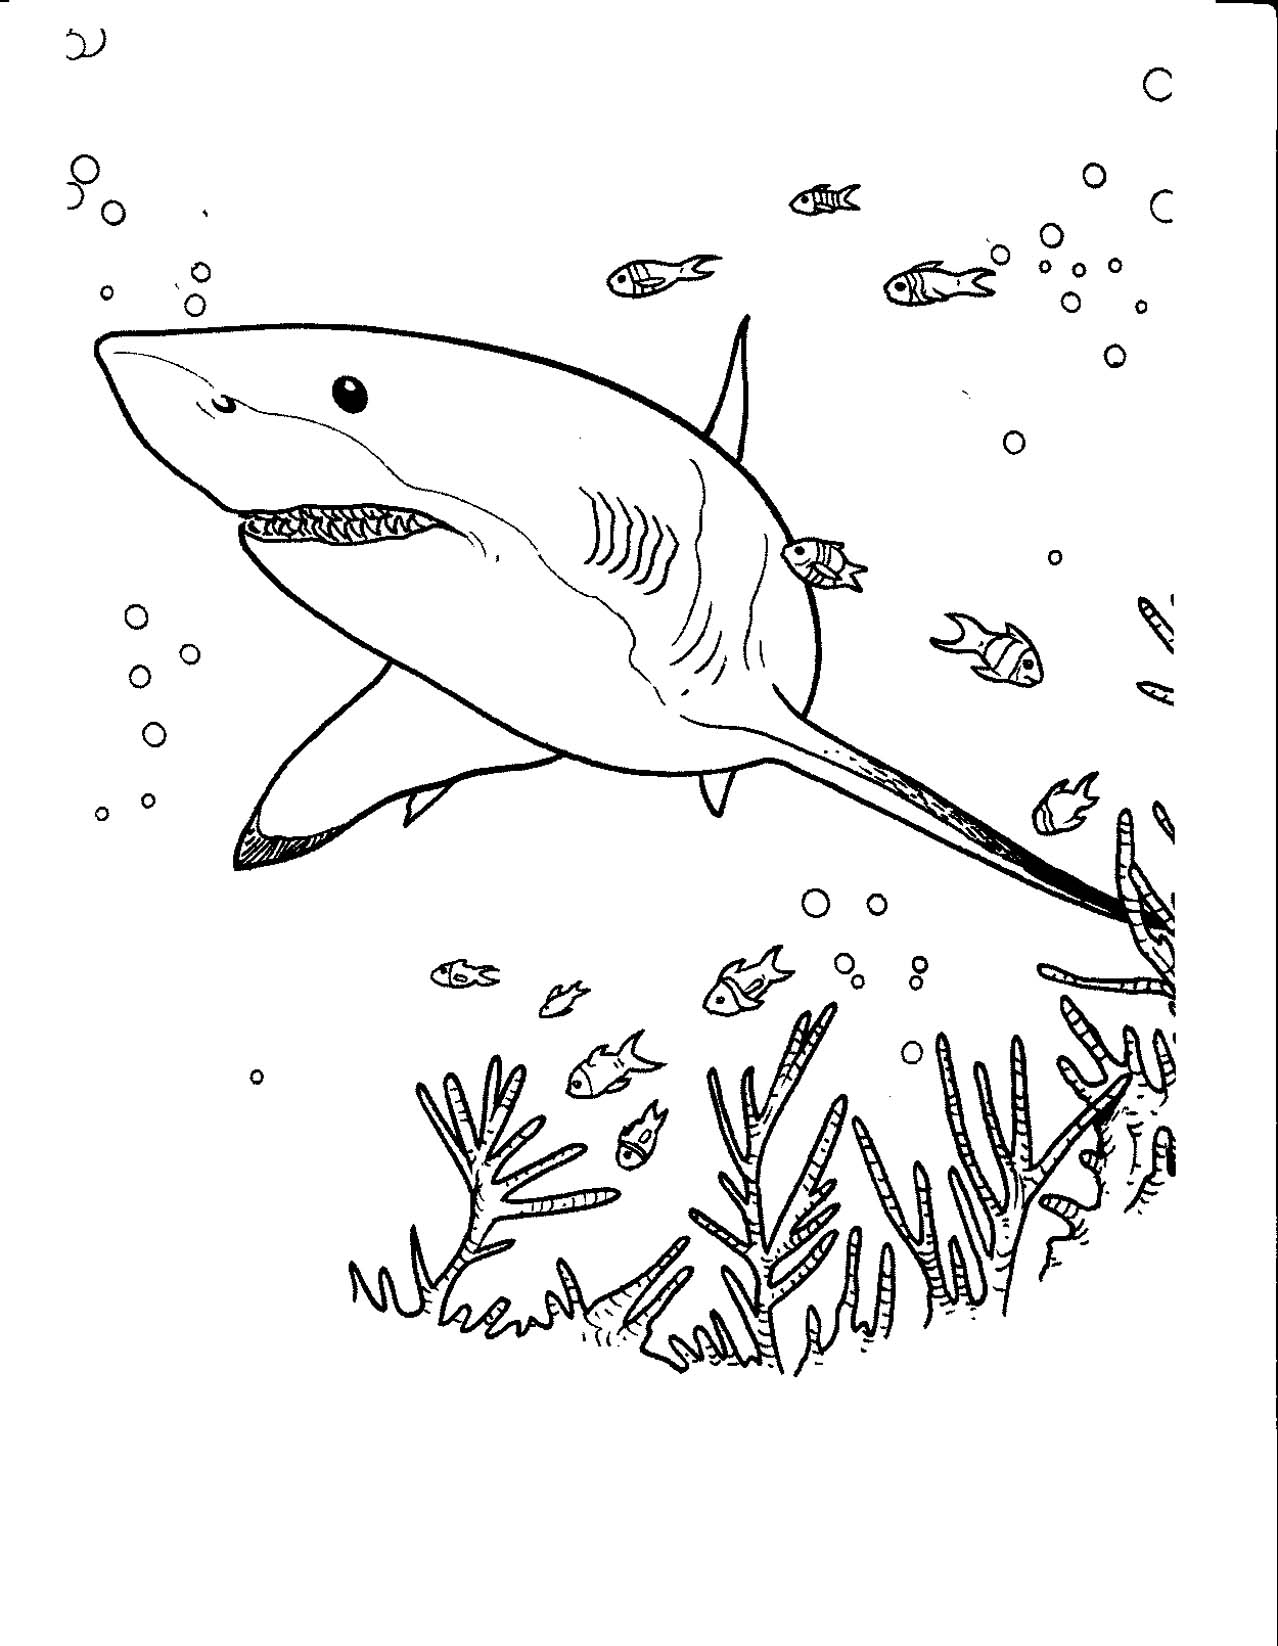 Sharks free to color for kids - Sharks Kids Coloring Pages